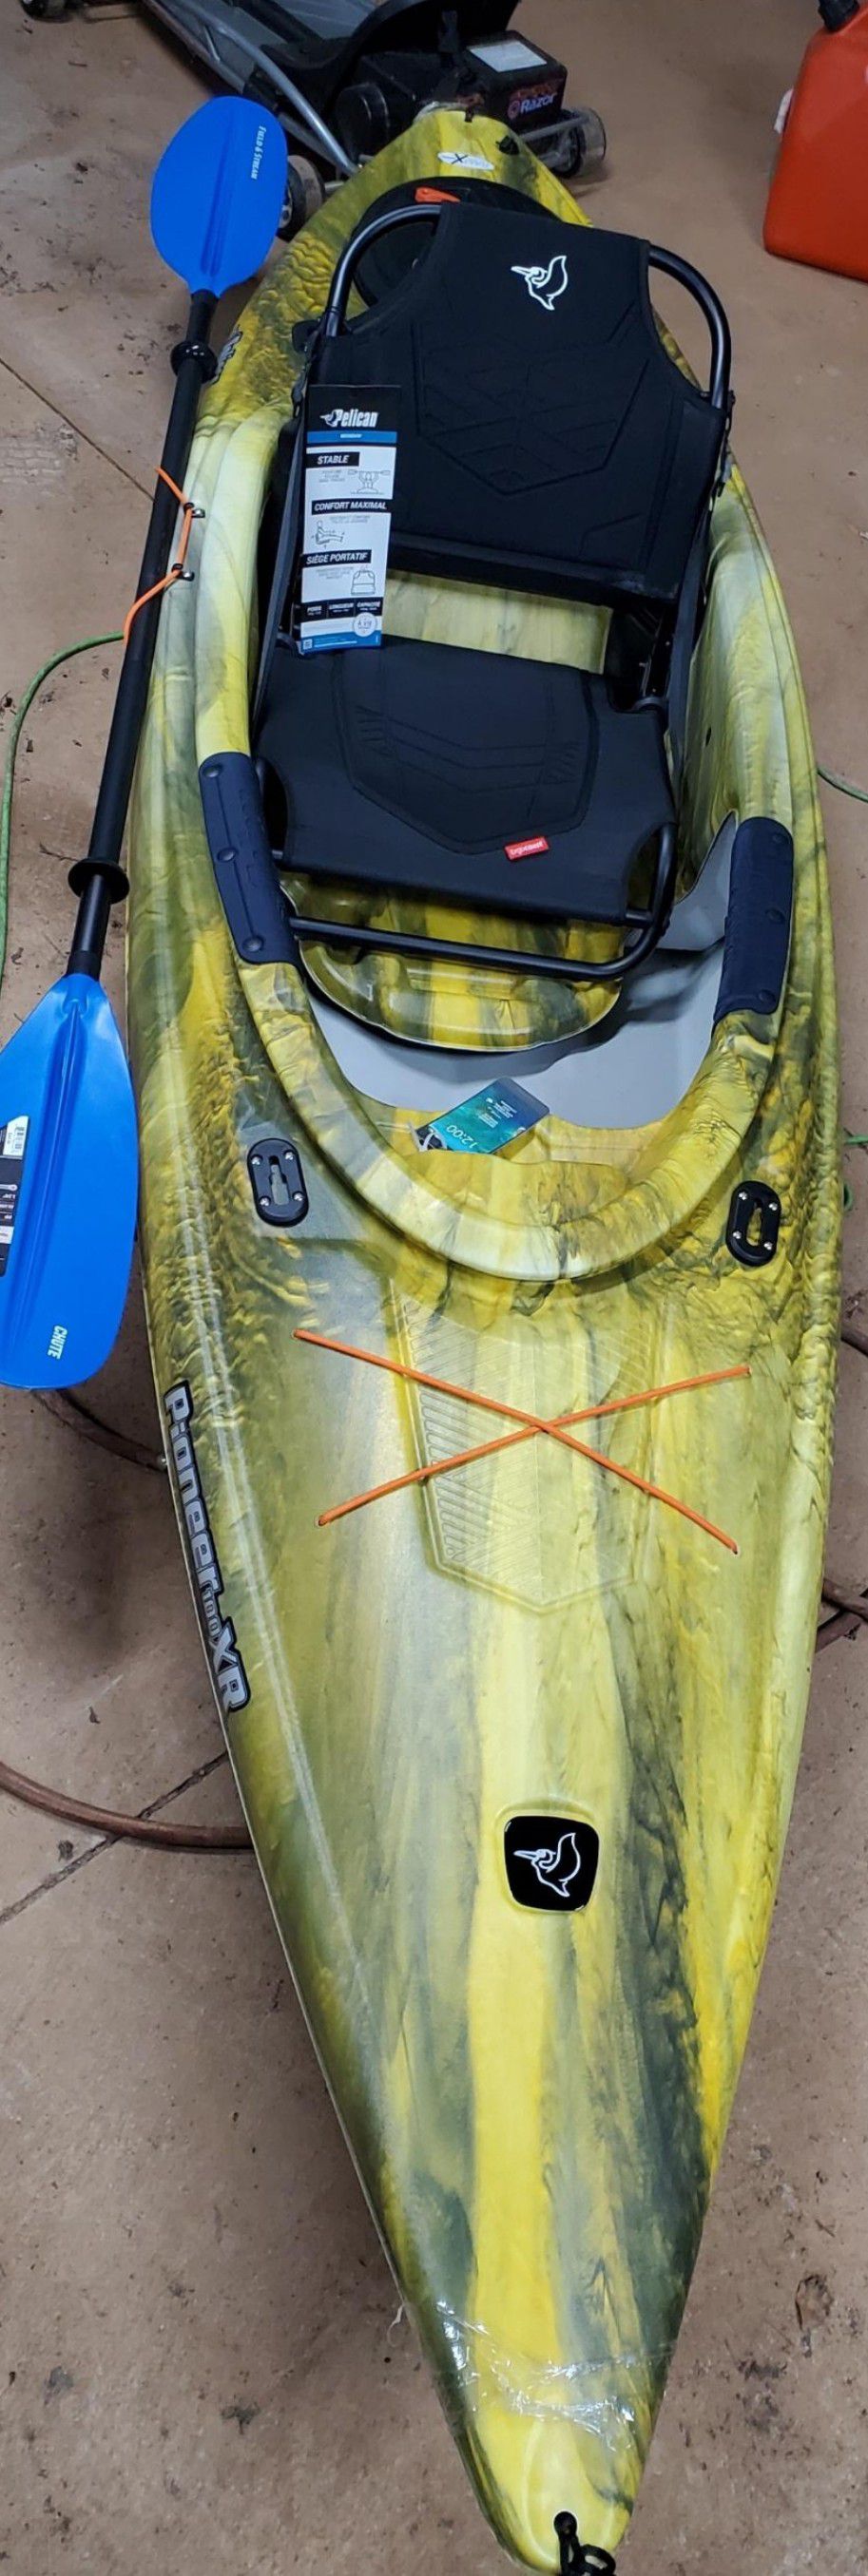 Pelican pioneer 100 xr kayak brand new with light weight paddle and comfort seat